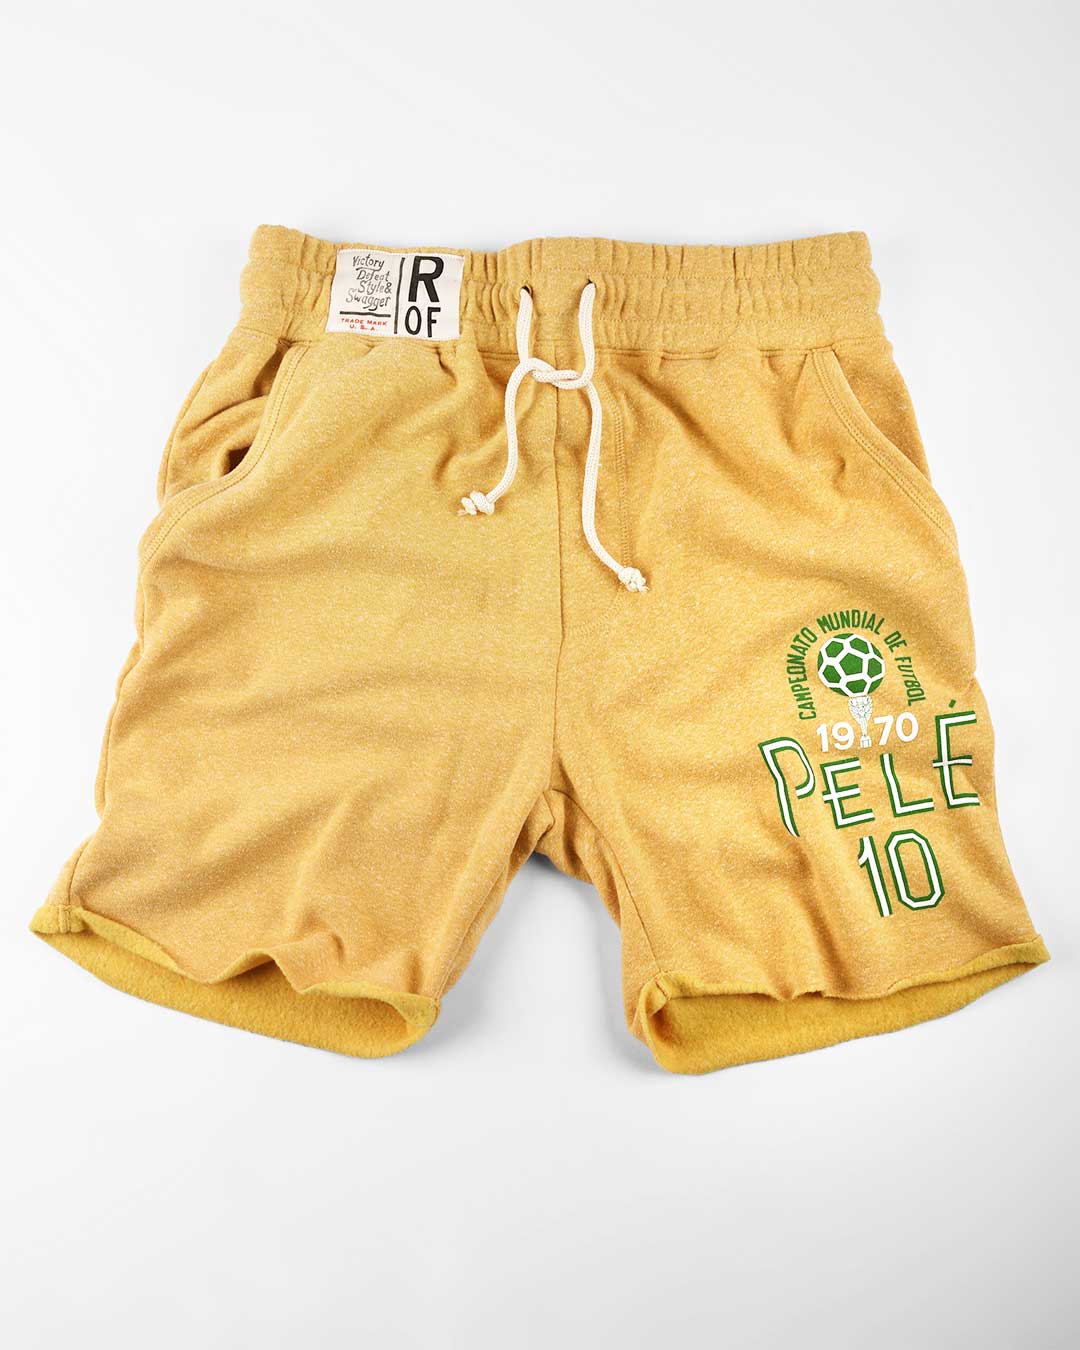 Pelé 1970 Yellow Shorts - Roots of Fight Canada